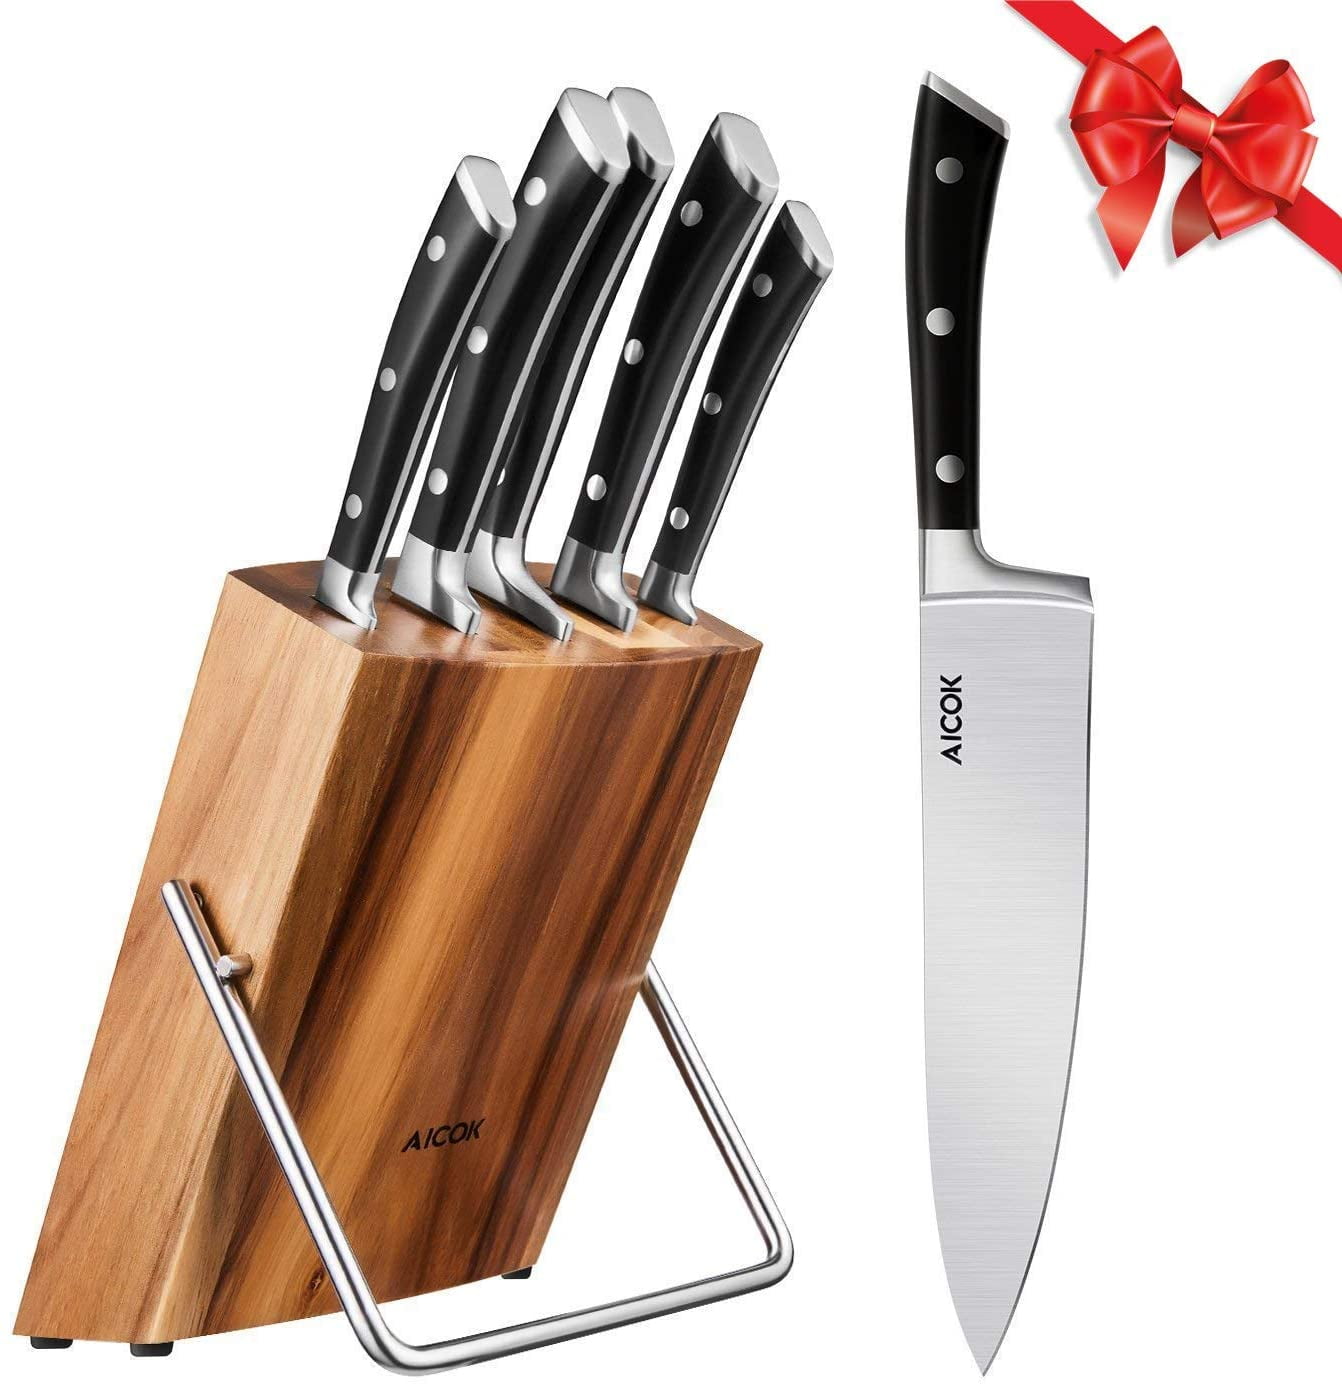 Aicok Knife Set, 6 Pieces German Stainless Steel Small Kitchen Knife Set with Wooden Block, Cutlery Block